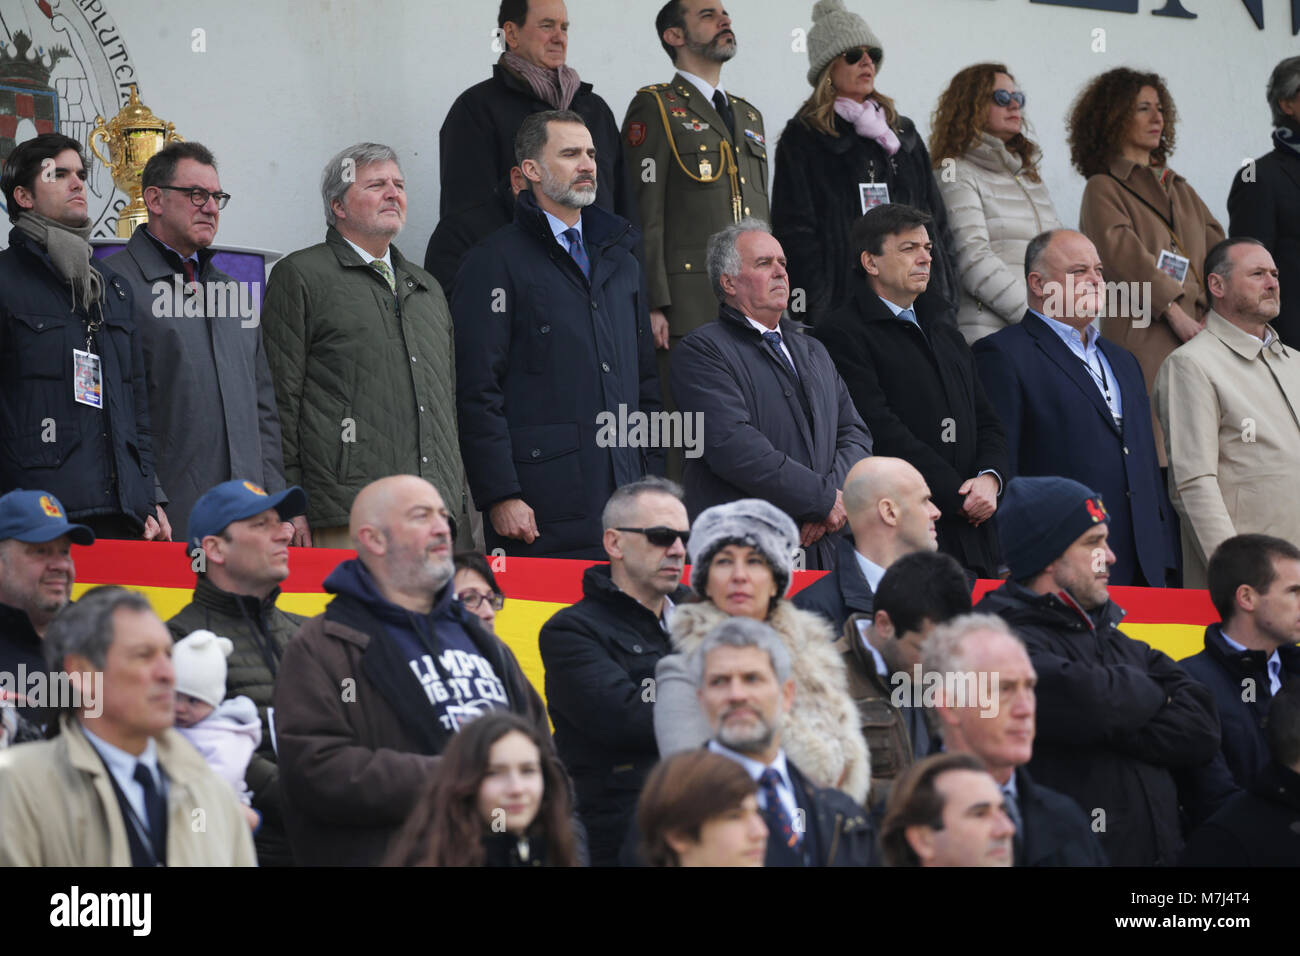 Madrid, Spain. 11th March, 2018. Spanish King Felipe VI and Inigo Mendez de Vigo during the match of rugby between Spain vs Germany in the Central of Complutense Madrid on Sunday 11 March 2018. Spain won (84-10) Germany. Credit: Gtres Información más Comuniación on line, S.L./Alamy Live News Stock Photo